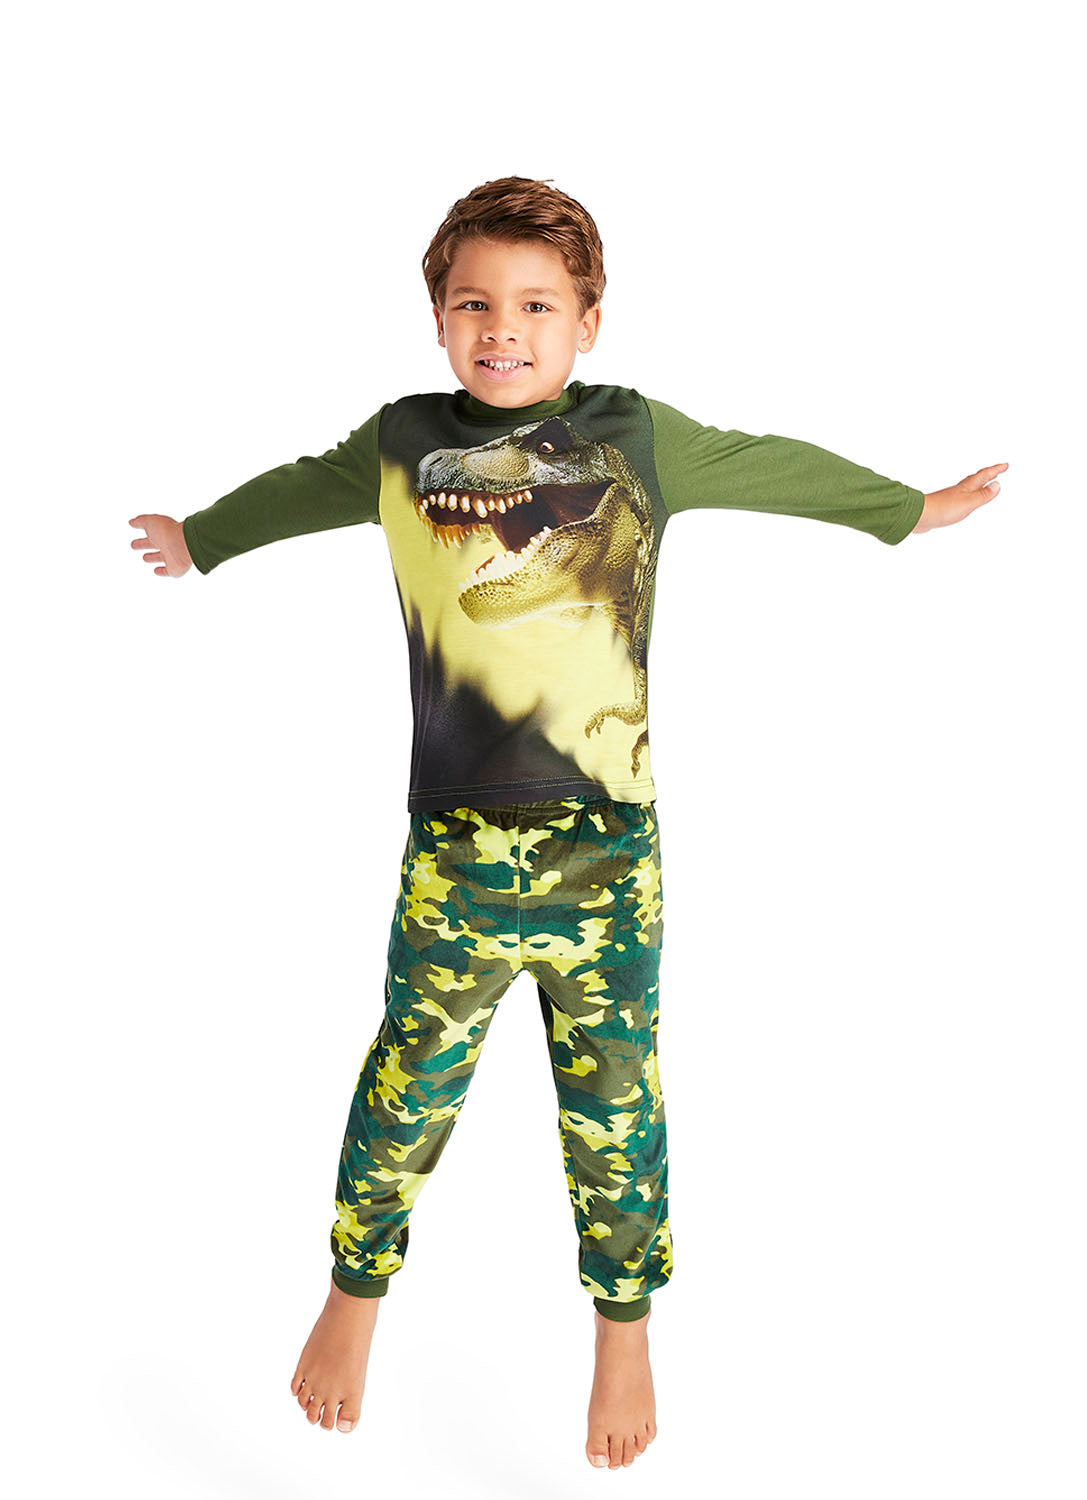 Little boy jumping and wearing Pajama Set with print T-Rex Dino plus Camo pants in green colour 